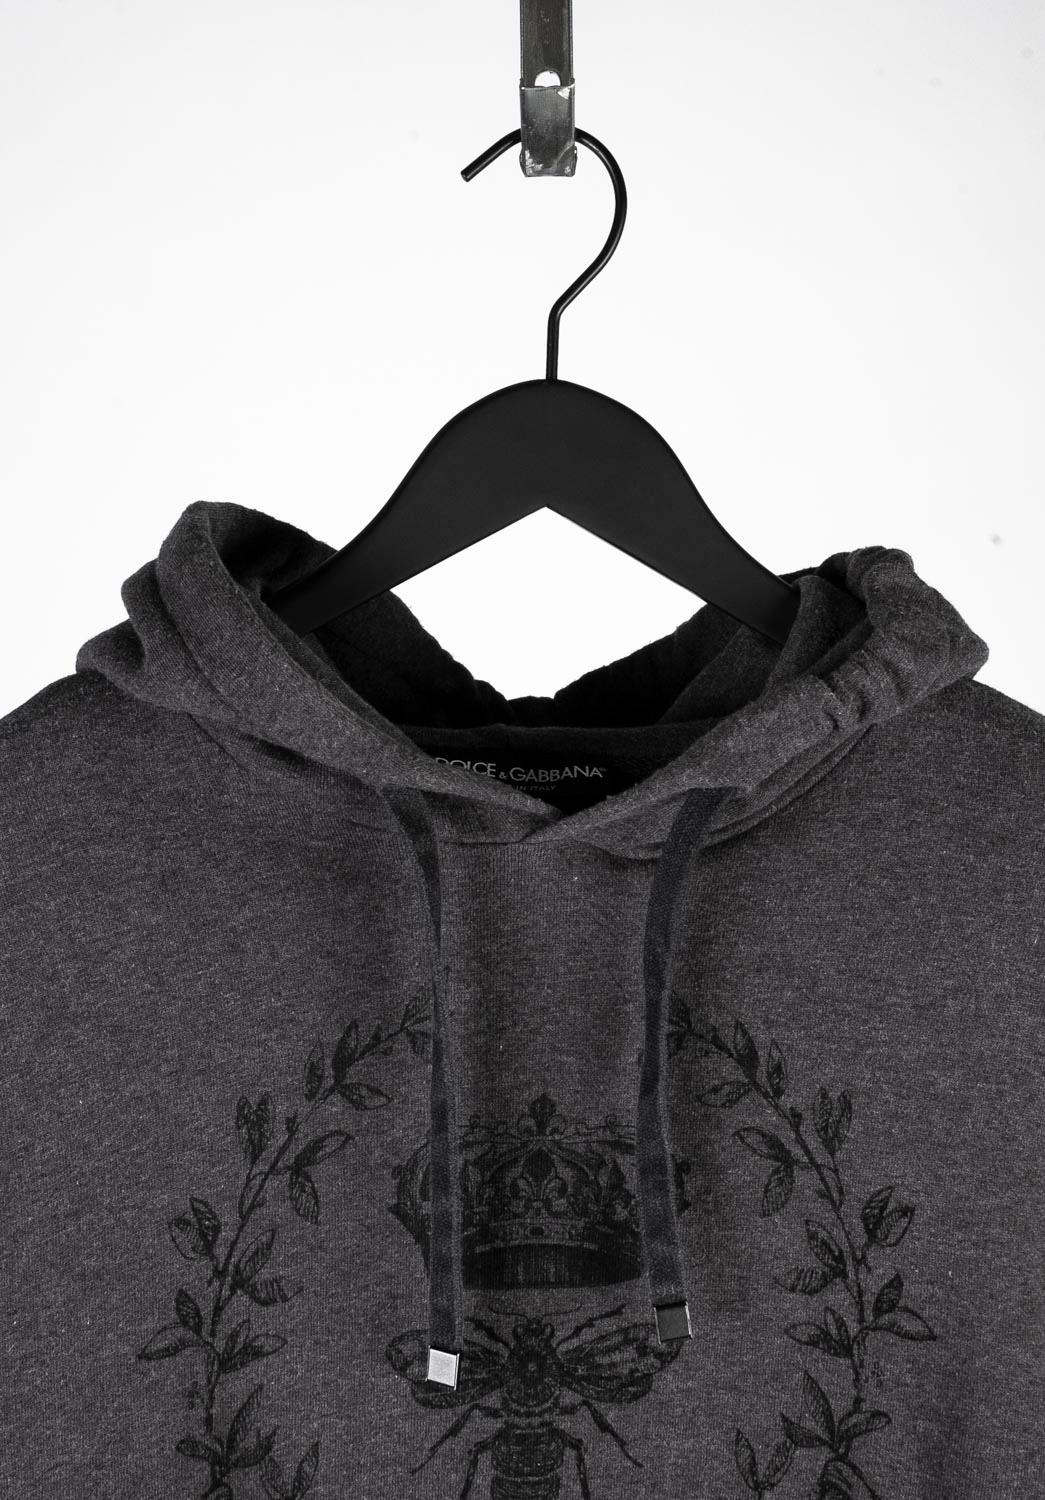 100% genuine Dolce&Gabbana Men Hoodie, S547
Color: Grey
(An actual color may a bit vary due to individual computer screen interpretation)
Material: 100% cotton
Tag size: 46IT runs Medium
This jumper is great quality item. Rate 8.5 of 10, very good